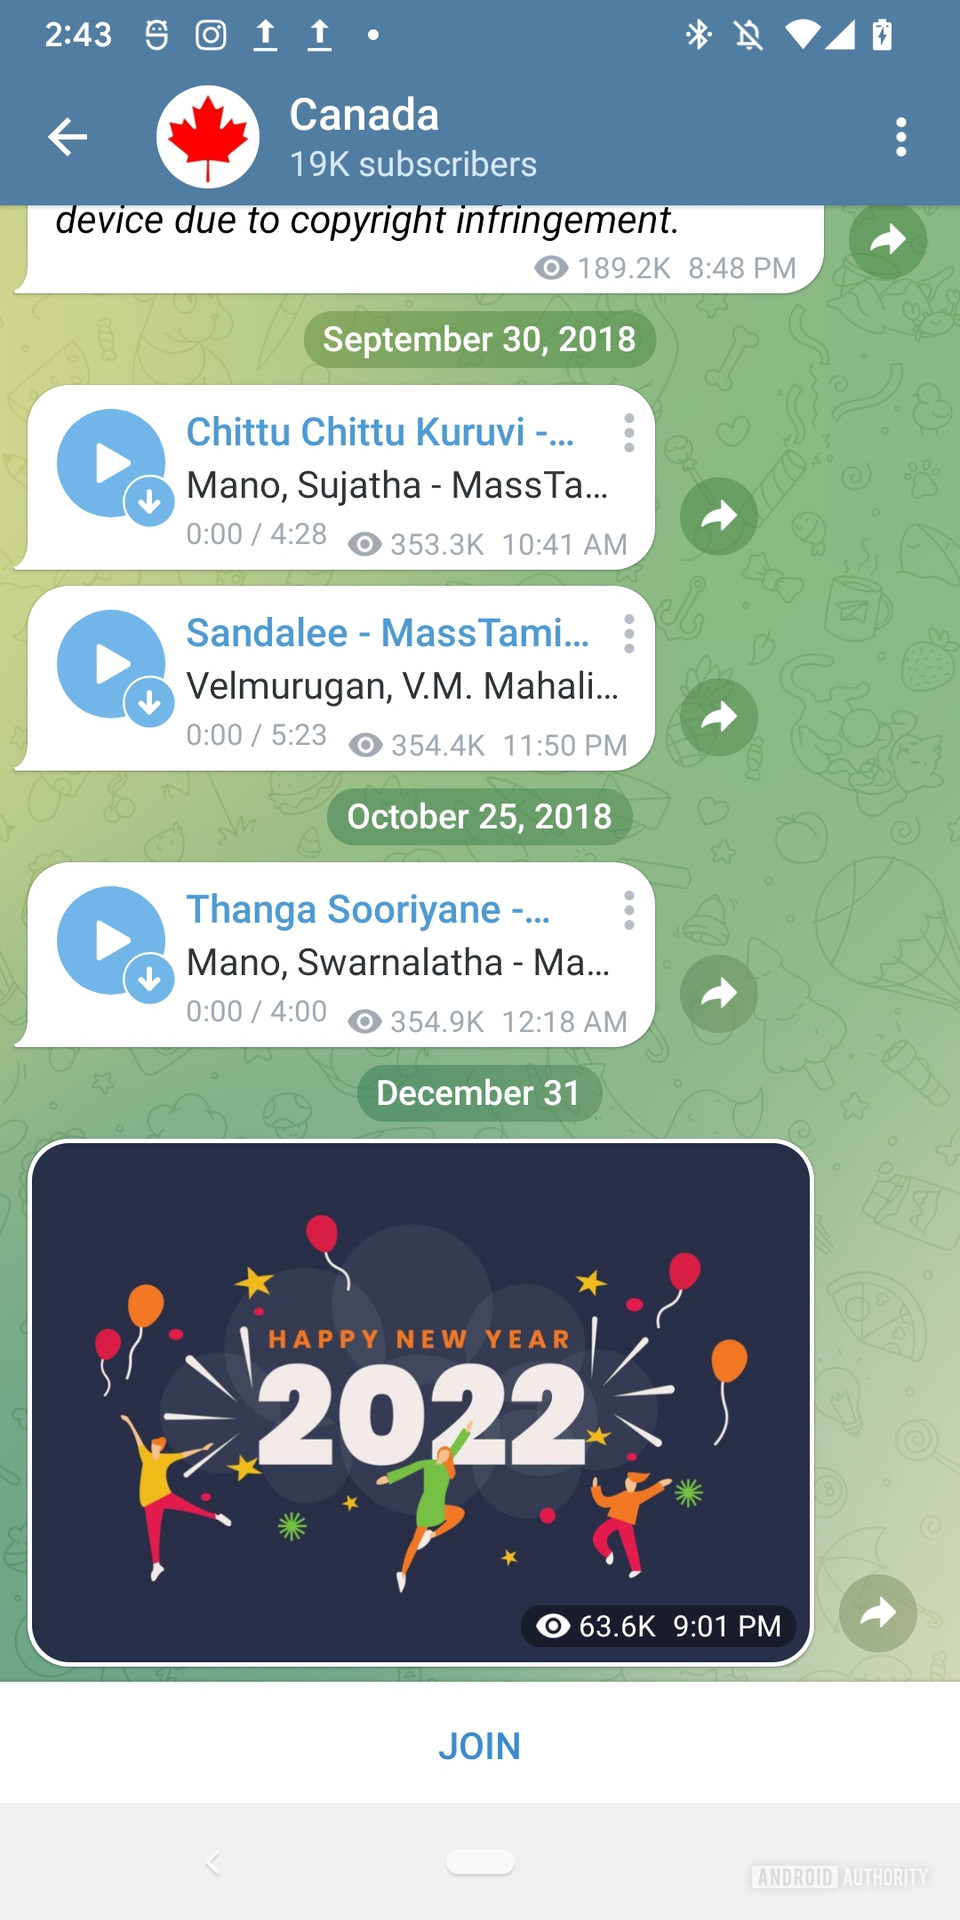 The 'Canada' Telegram group showing messages from various people in the group and a 'Join' button at the bottom.